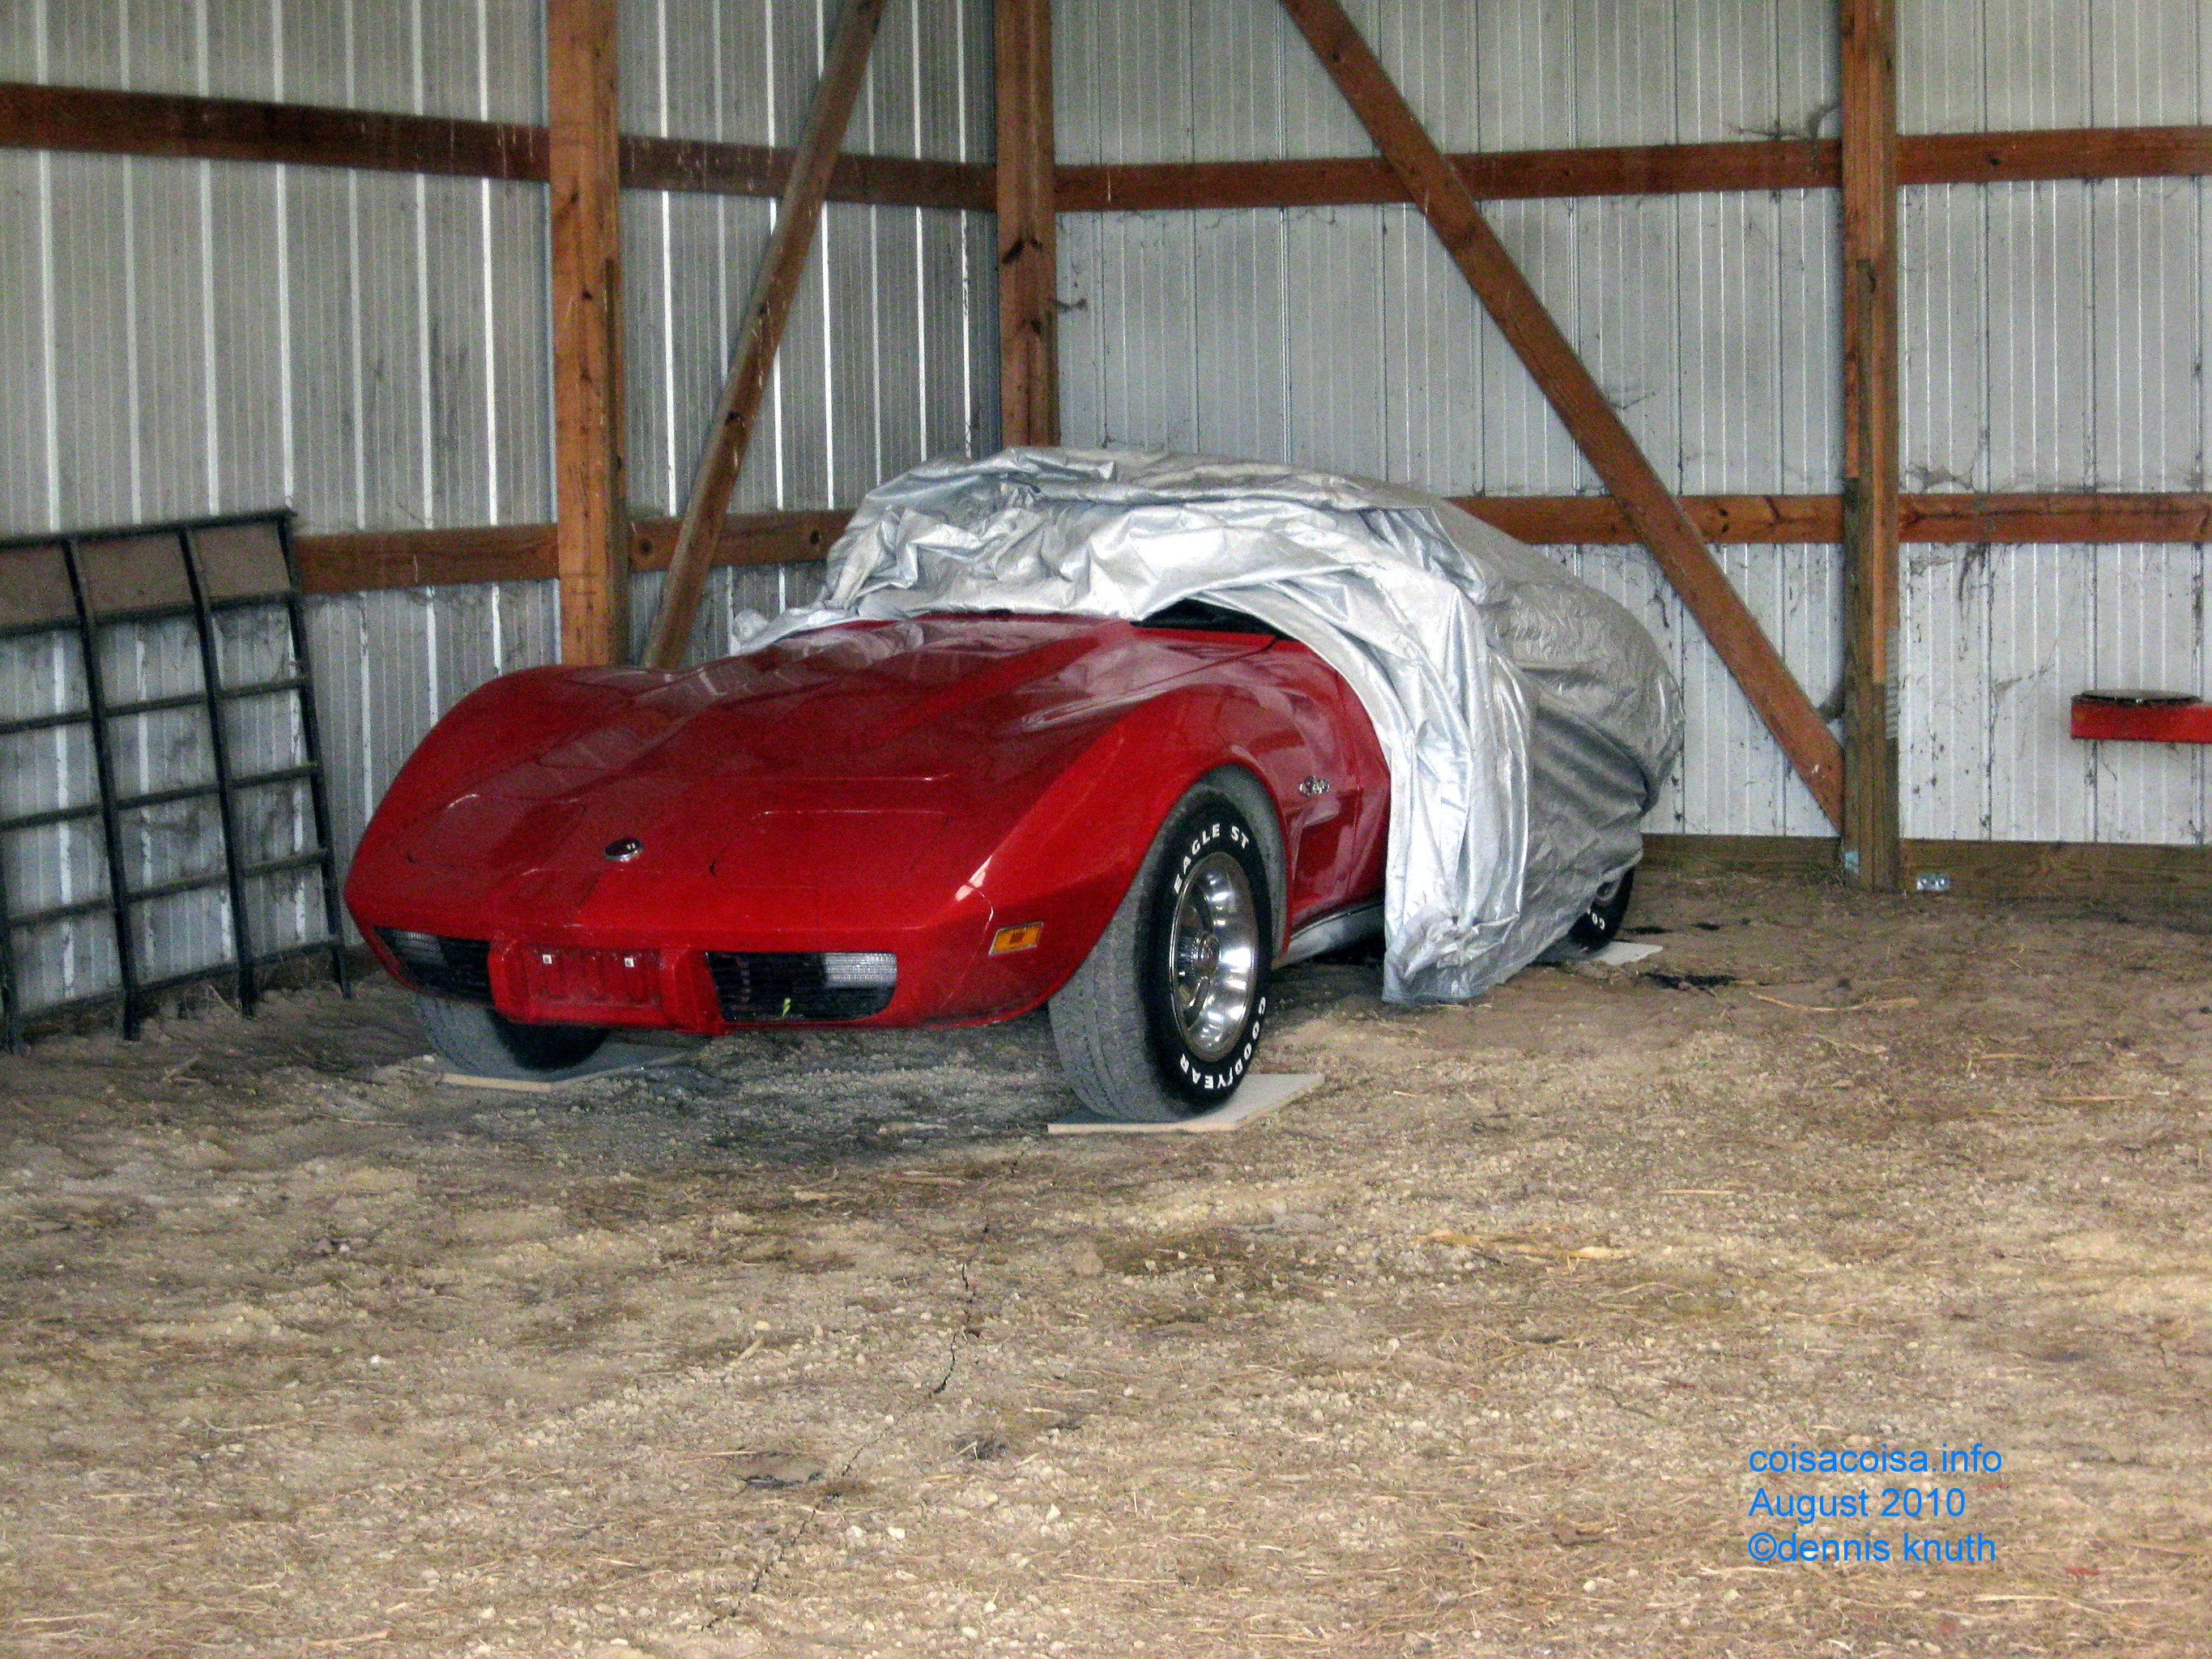 Justin's Corvette in the shed of Gary and Sherri